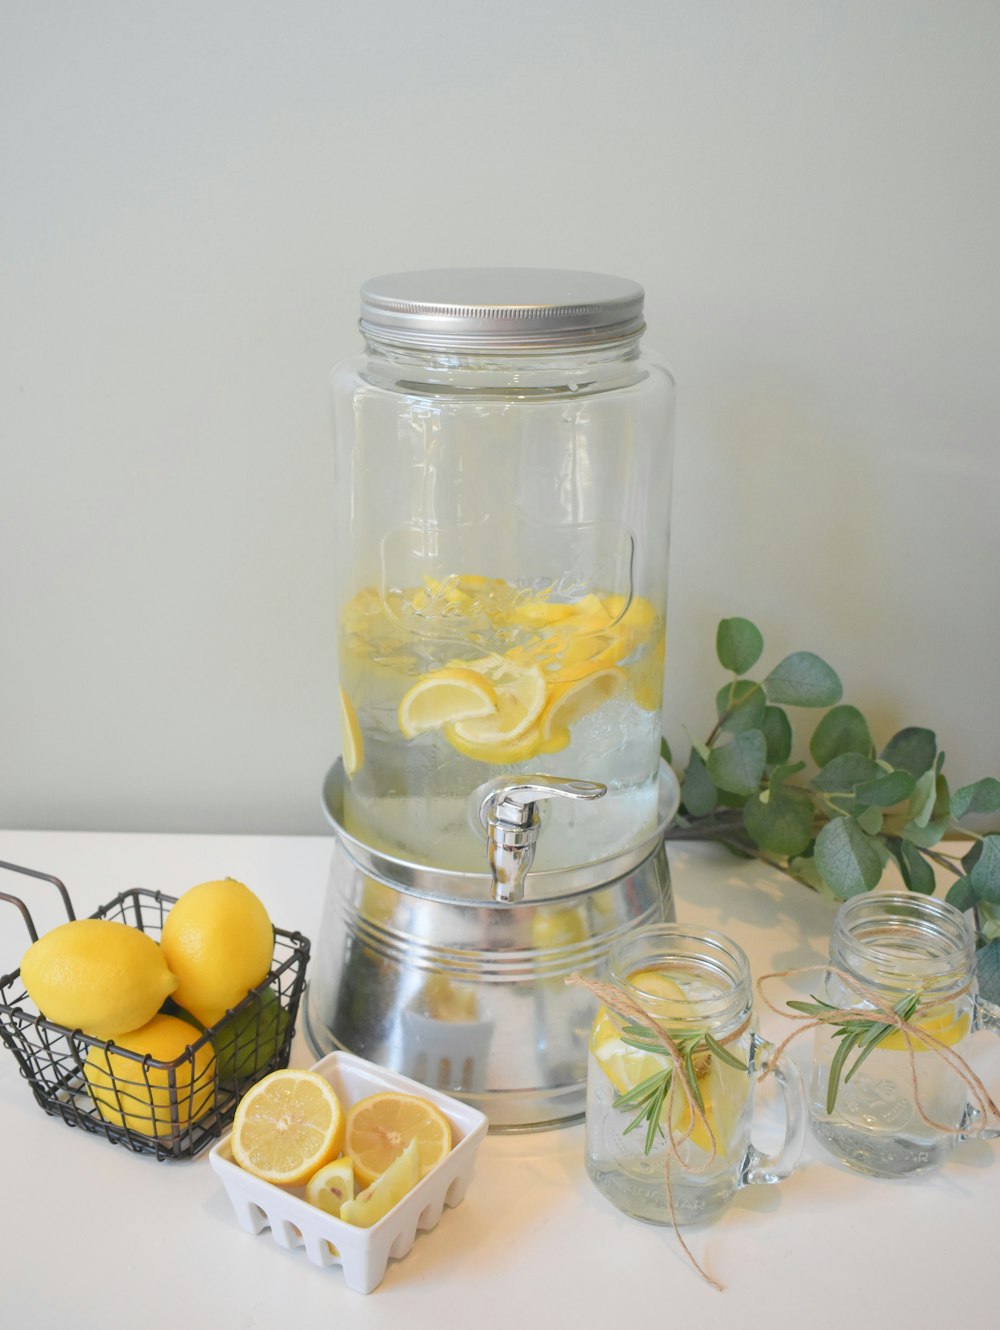 clear glass jar with yellow fruits